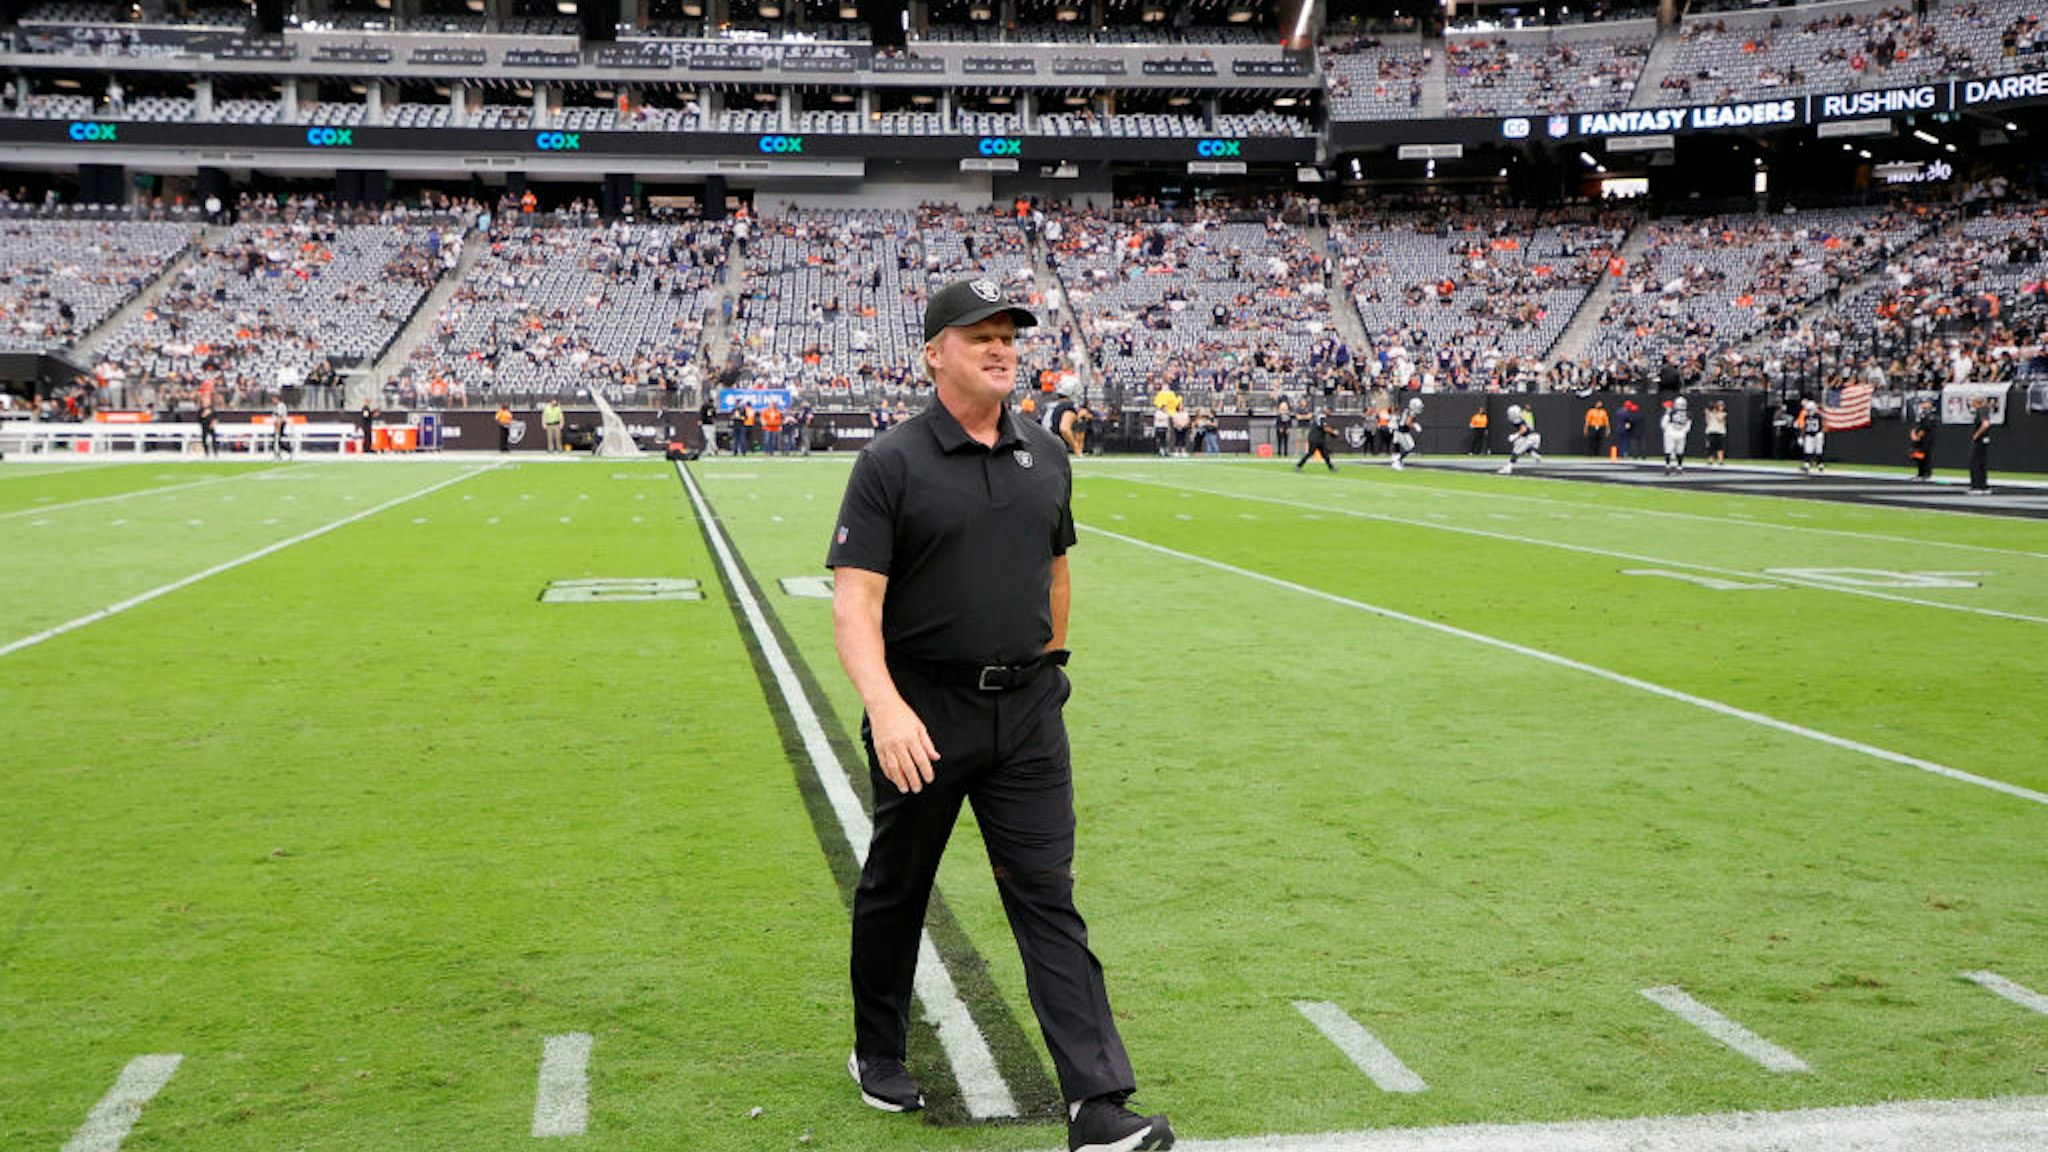 LAS VEGAS, NEVADA - OCTOBER 10: Head coach John Gruden of the Las Vegas Raiders walks on the field before a game against the Chicago Bears at Allegiant Stadium on October 10, 2021 in Las Vegas, Nevada. (Photo by Ethan Miller/Getty Images)